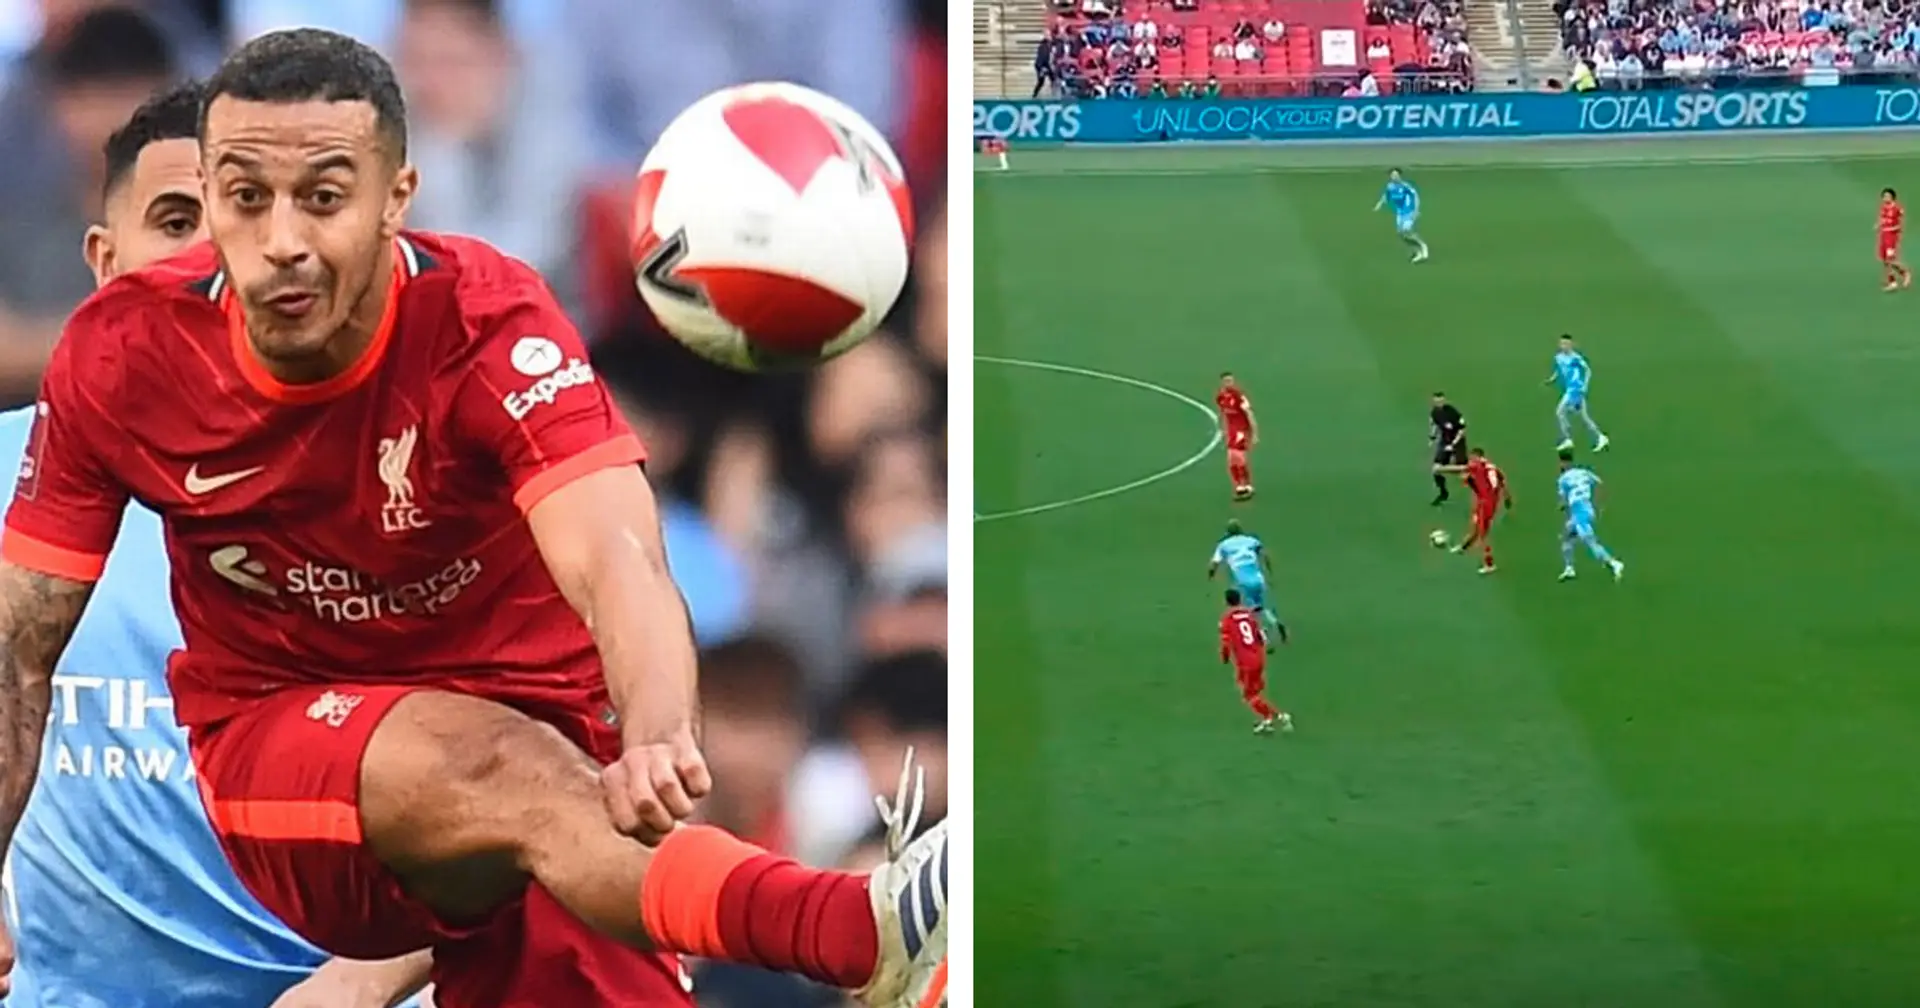 'Makes me fall in love with football all over again': LFC fans rave over Thiago's perfect pass in City win